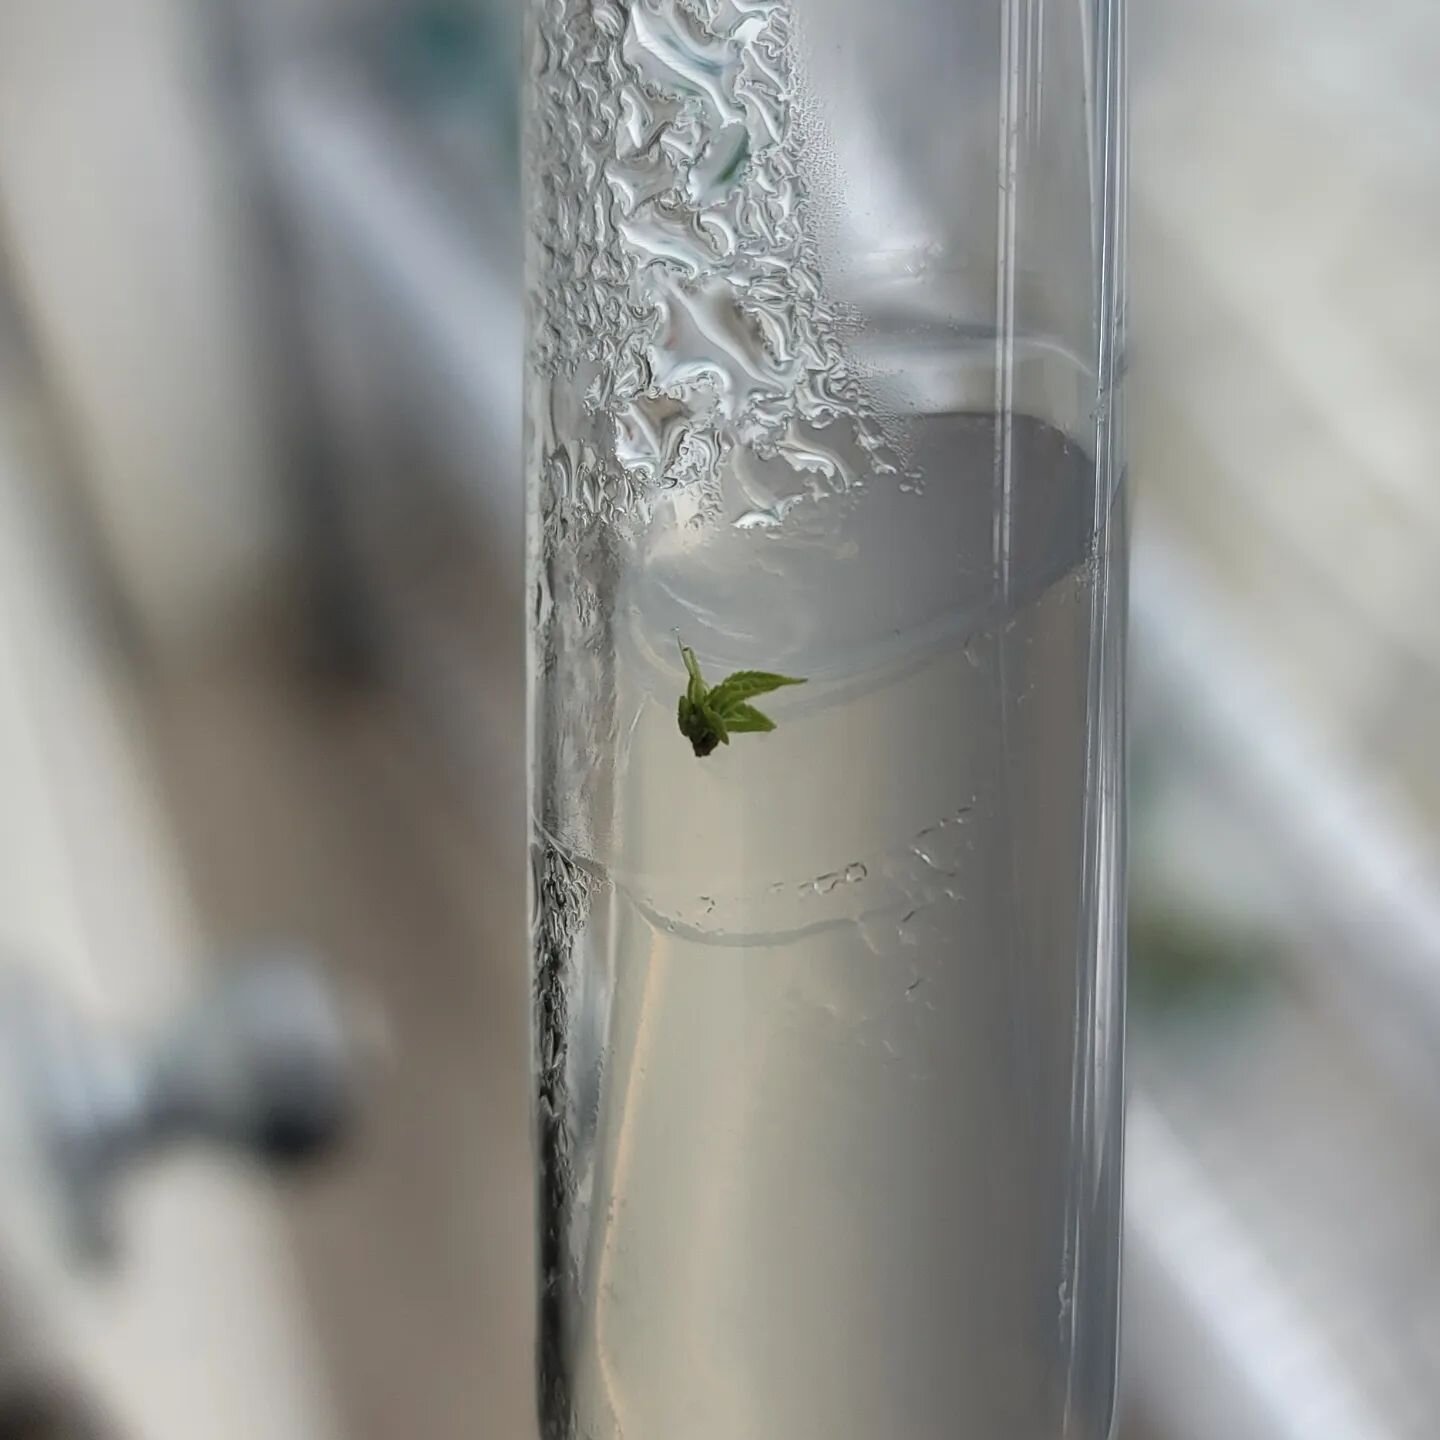 Wedding crasher meristem that jumped off the ledge.  2+ months and time to put her in a new home.  It take forever but the kids finally do grow up. 

#tissueculture
#tissuecultureplants
#cannabisresearch 
#tissueculture
#sacramentocannabis